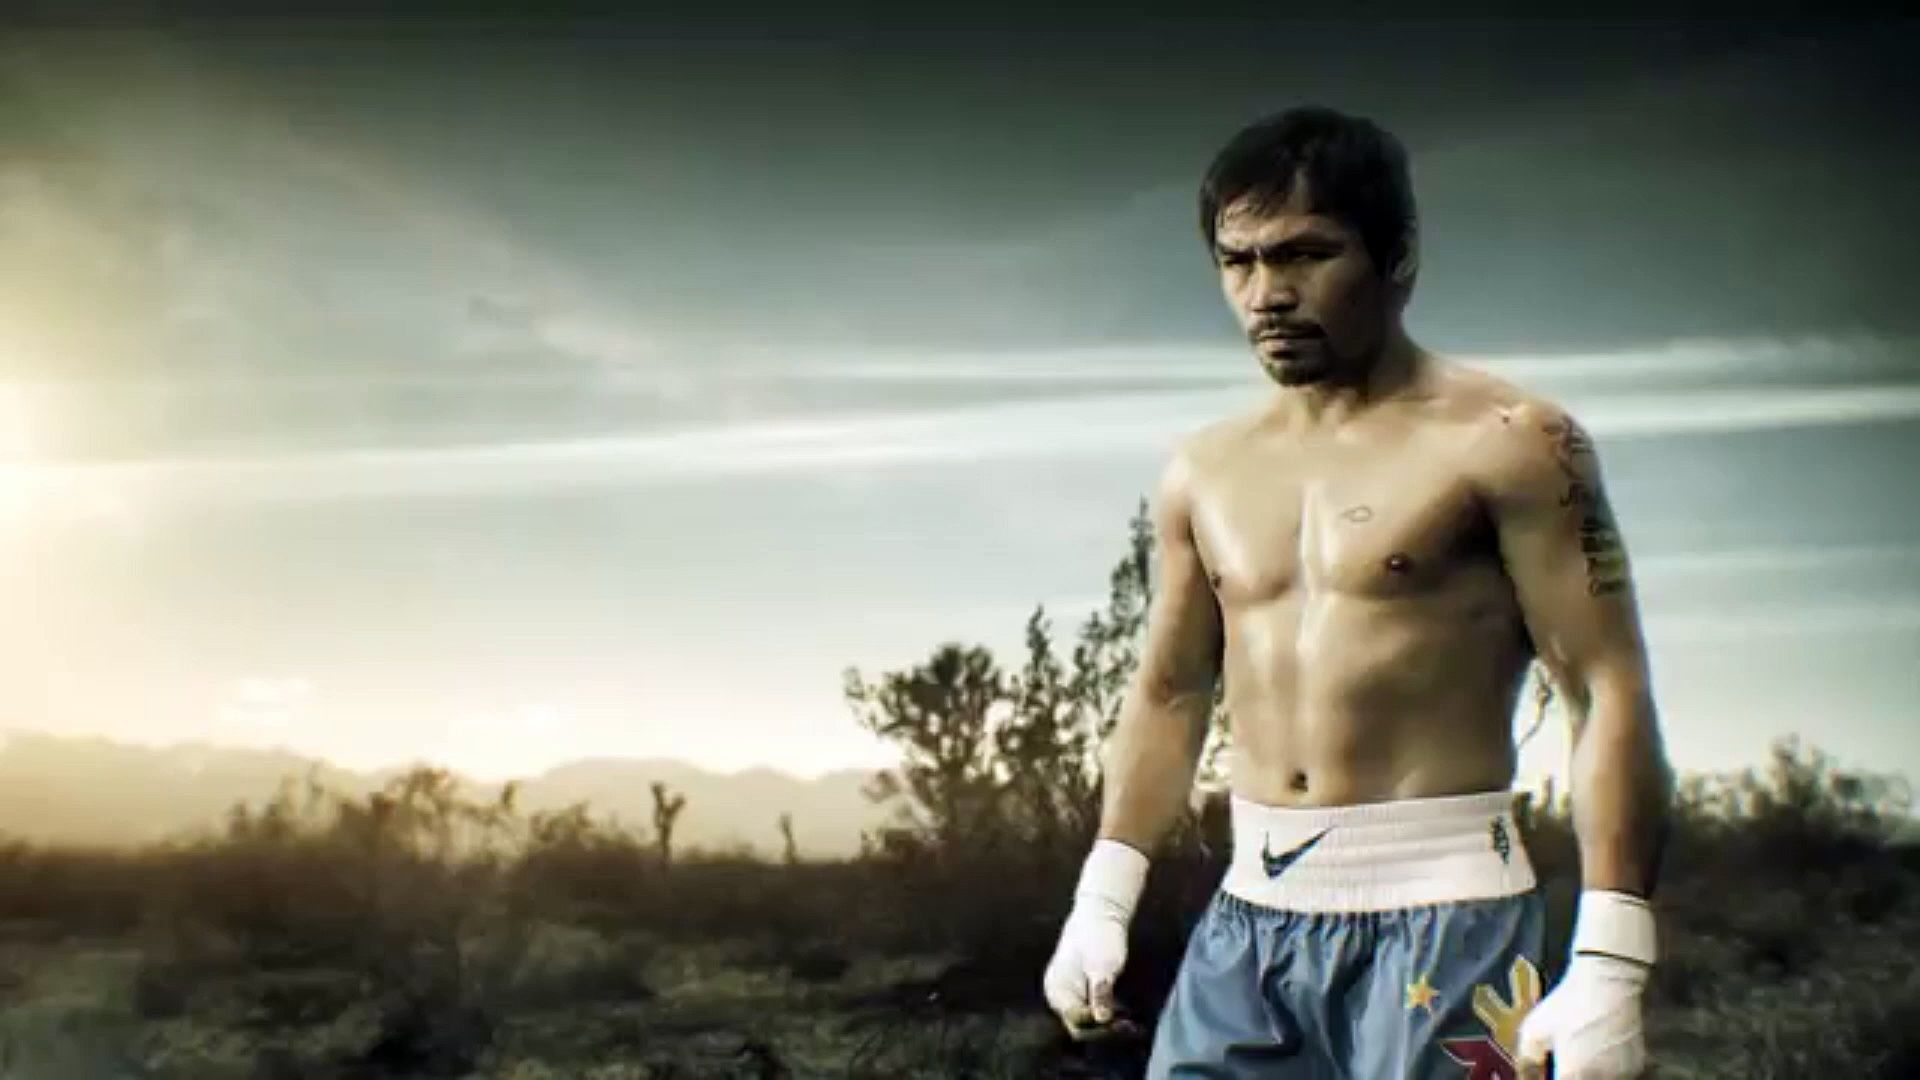 manny pacquiao hd wallpaper | Free hd wallpapers for desktop, high ...